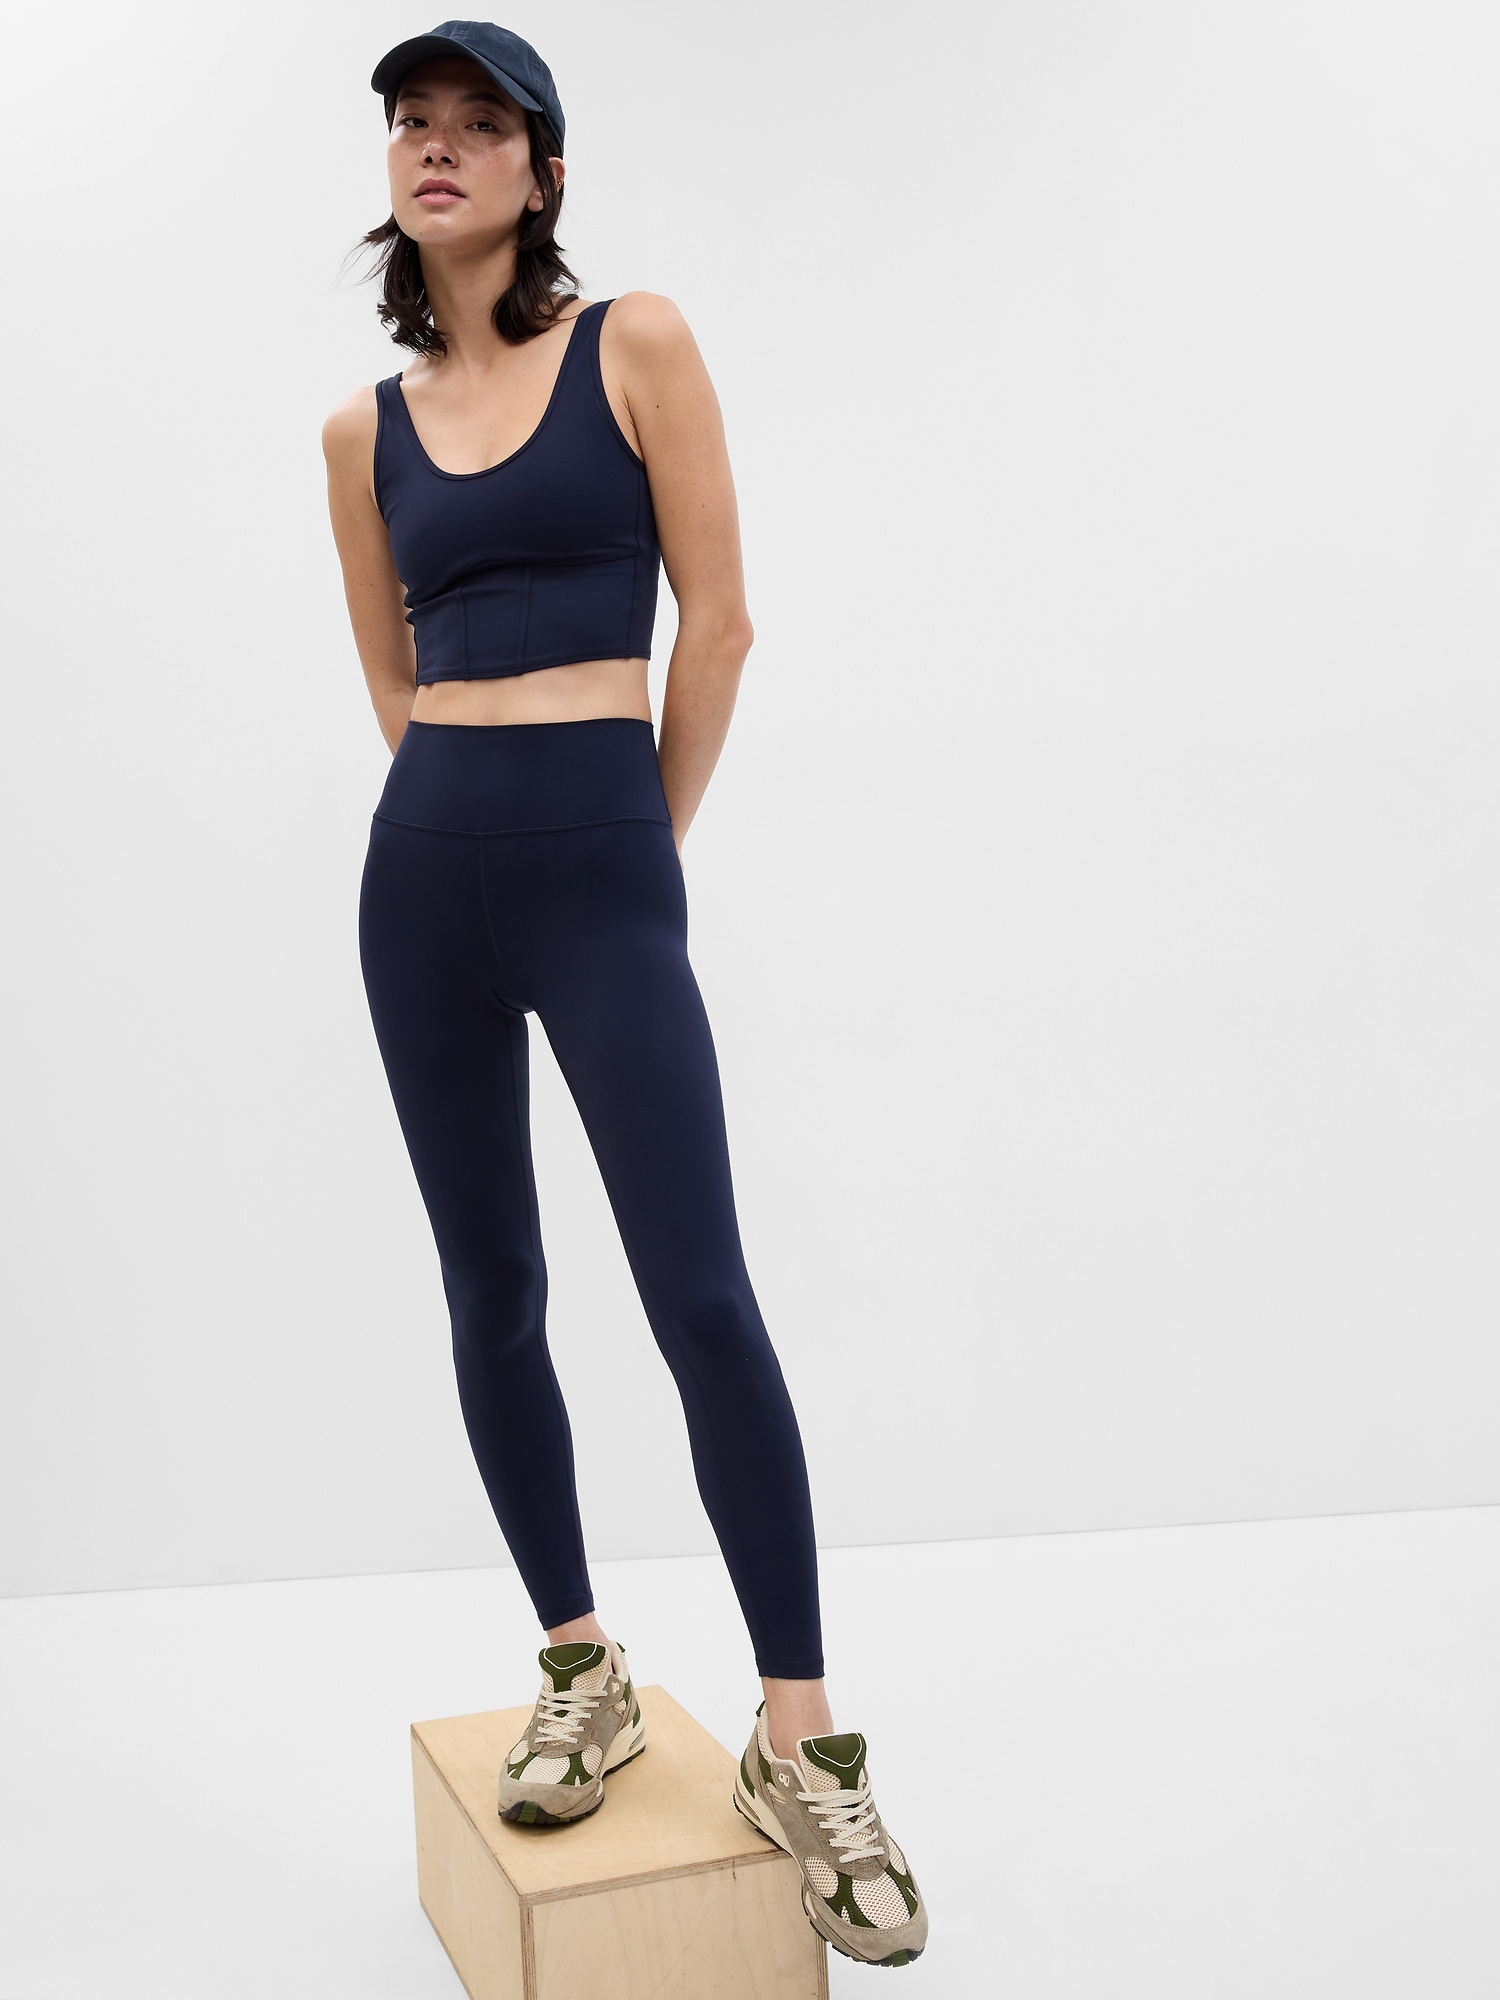 Women's Core Sports High Waisted Leggings in Eclipse Navy